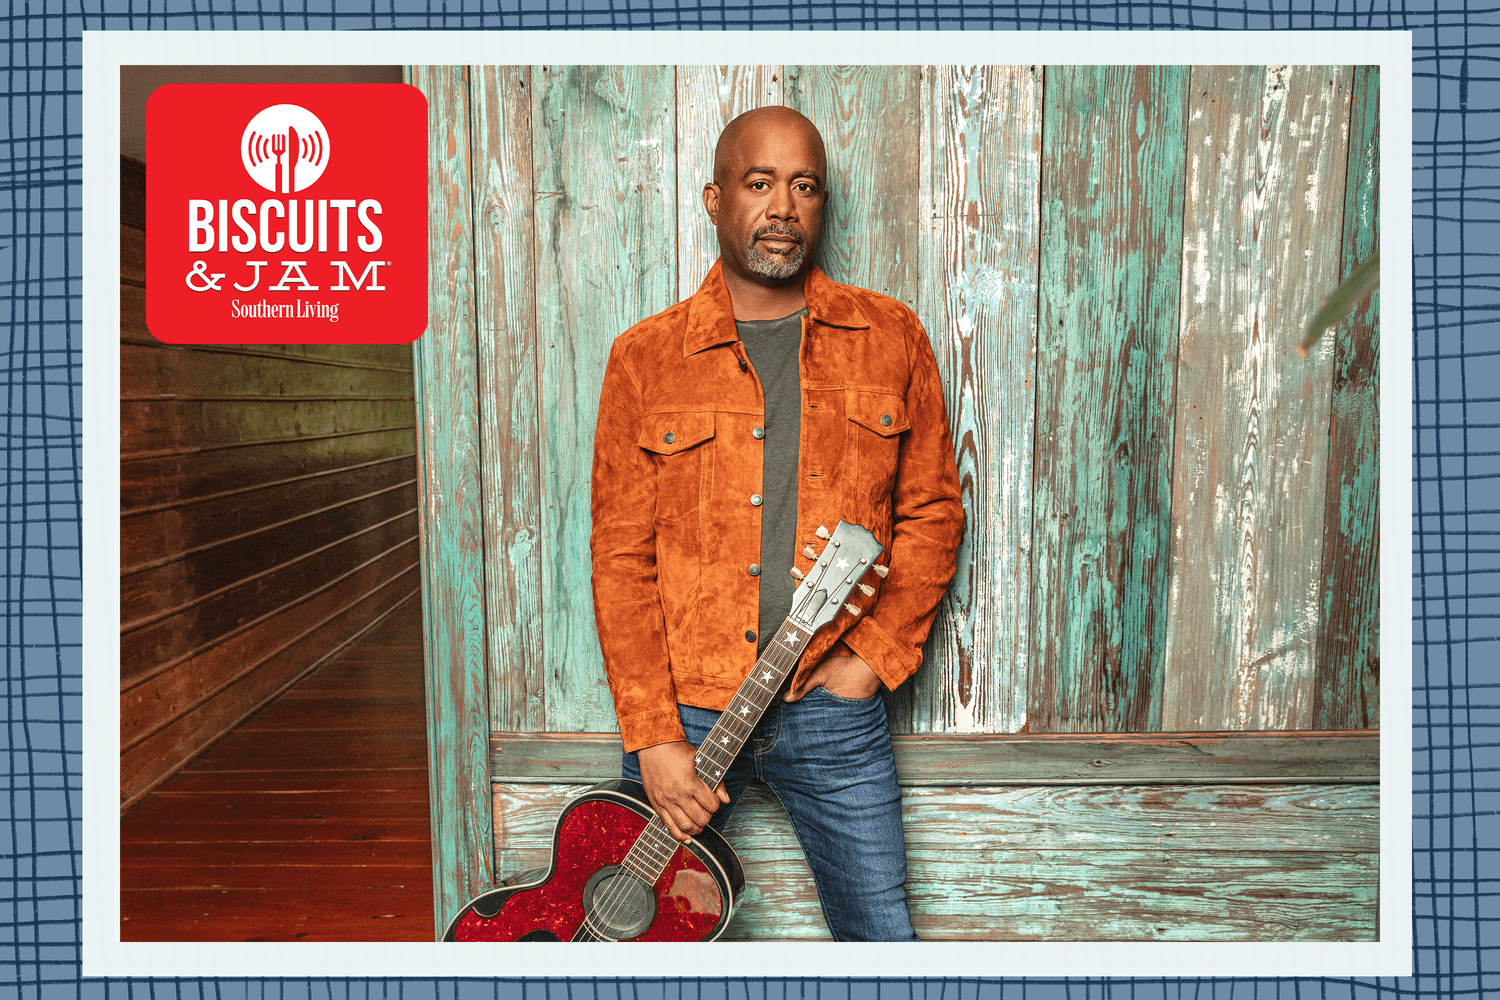 Darius Rucker On His New Memoir And Getting Back On The Road With Hootie & The Blowfish